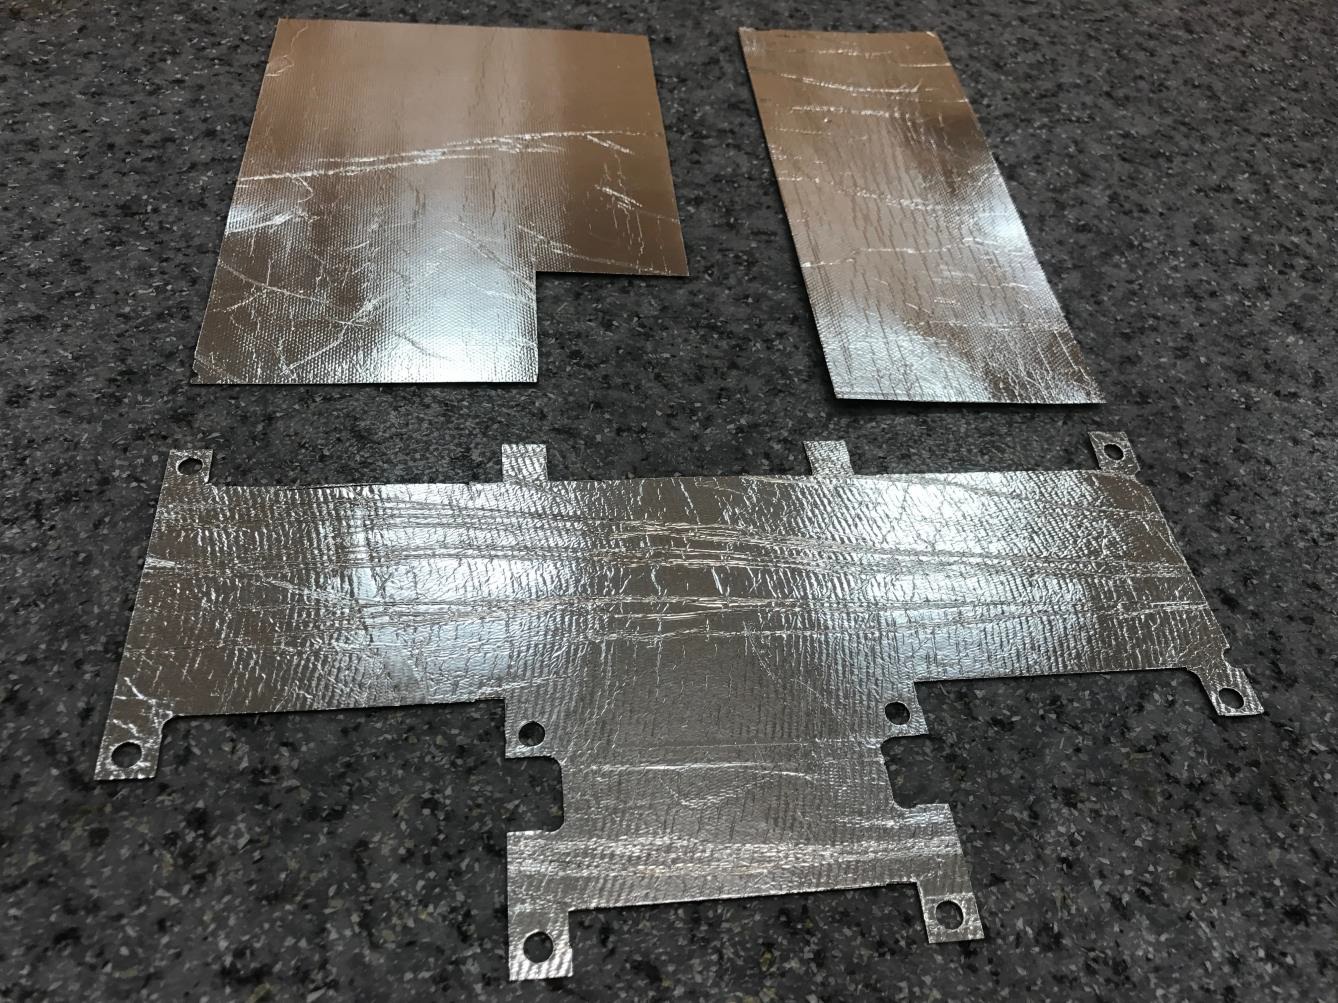 NIIKAM-TP-TRG Heat-absorbent gaskets of thermally expanded graphite